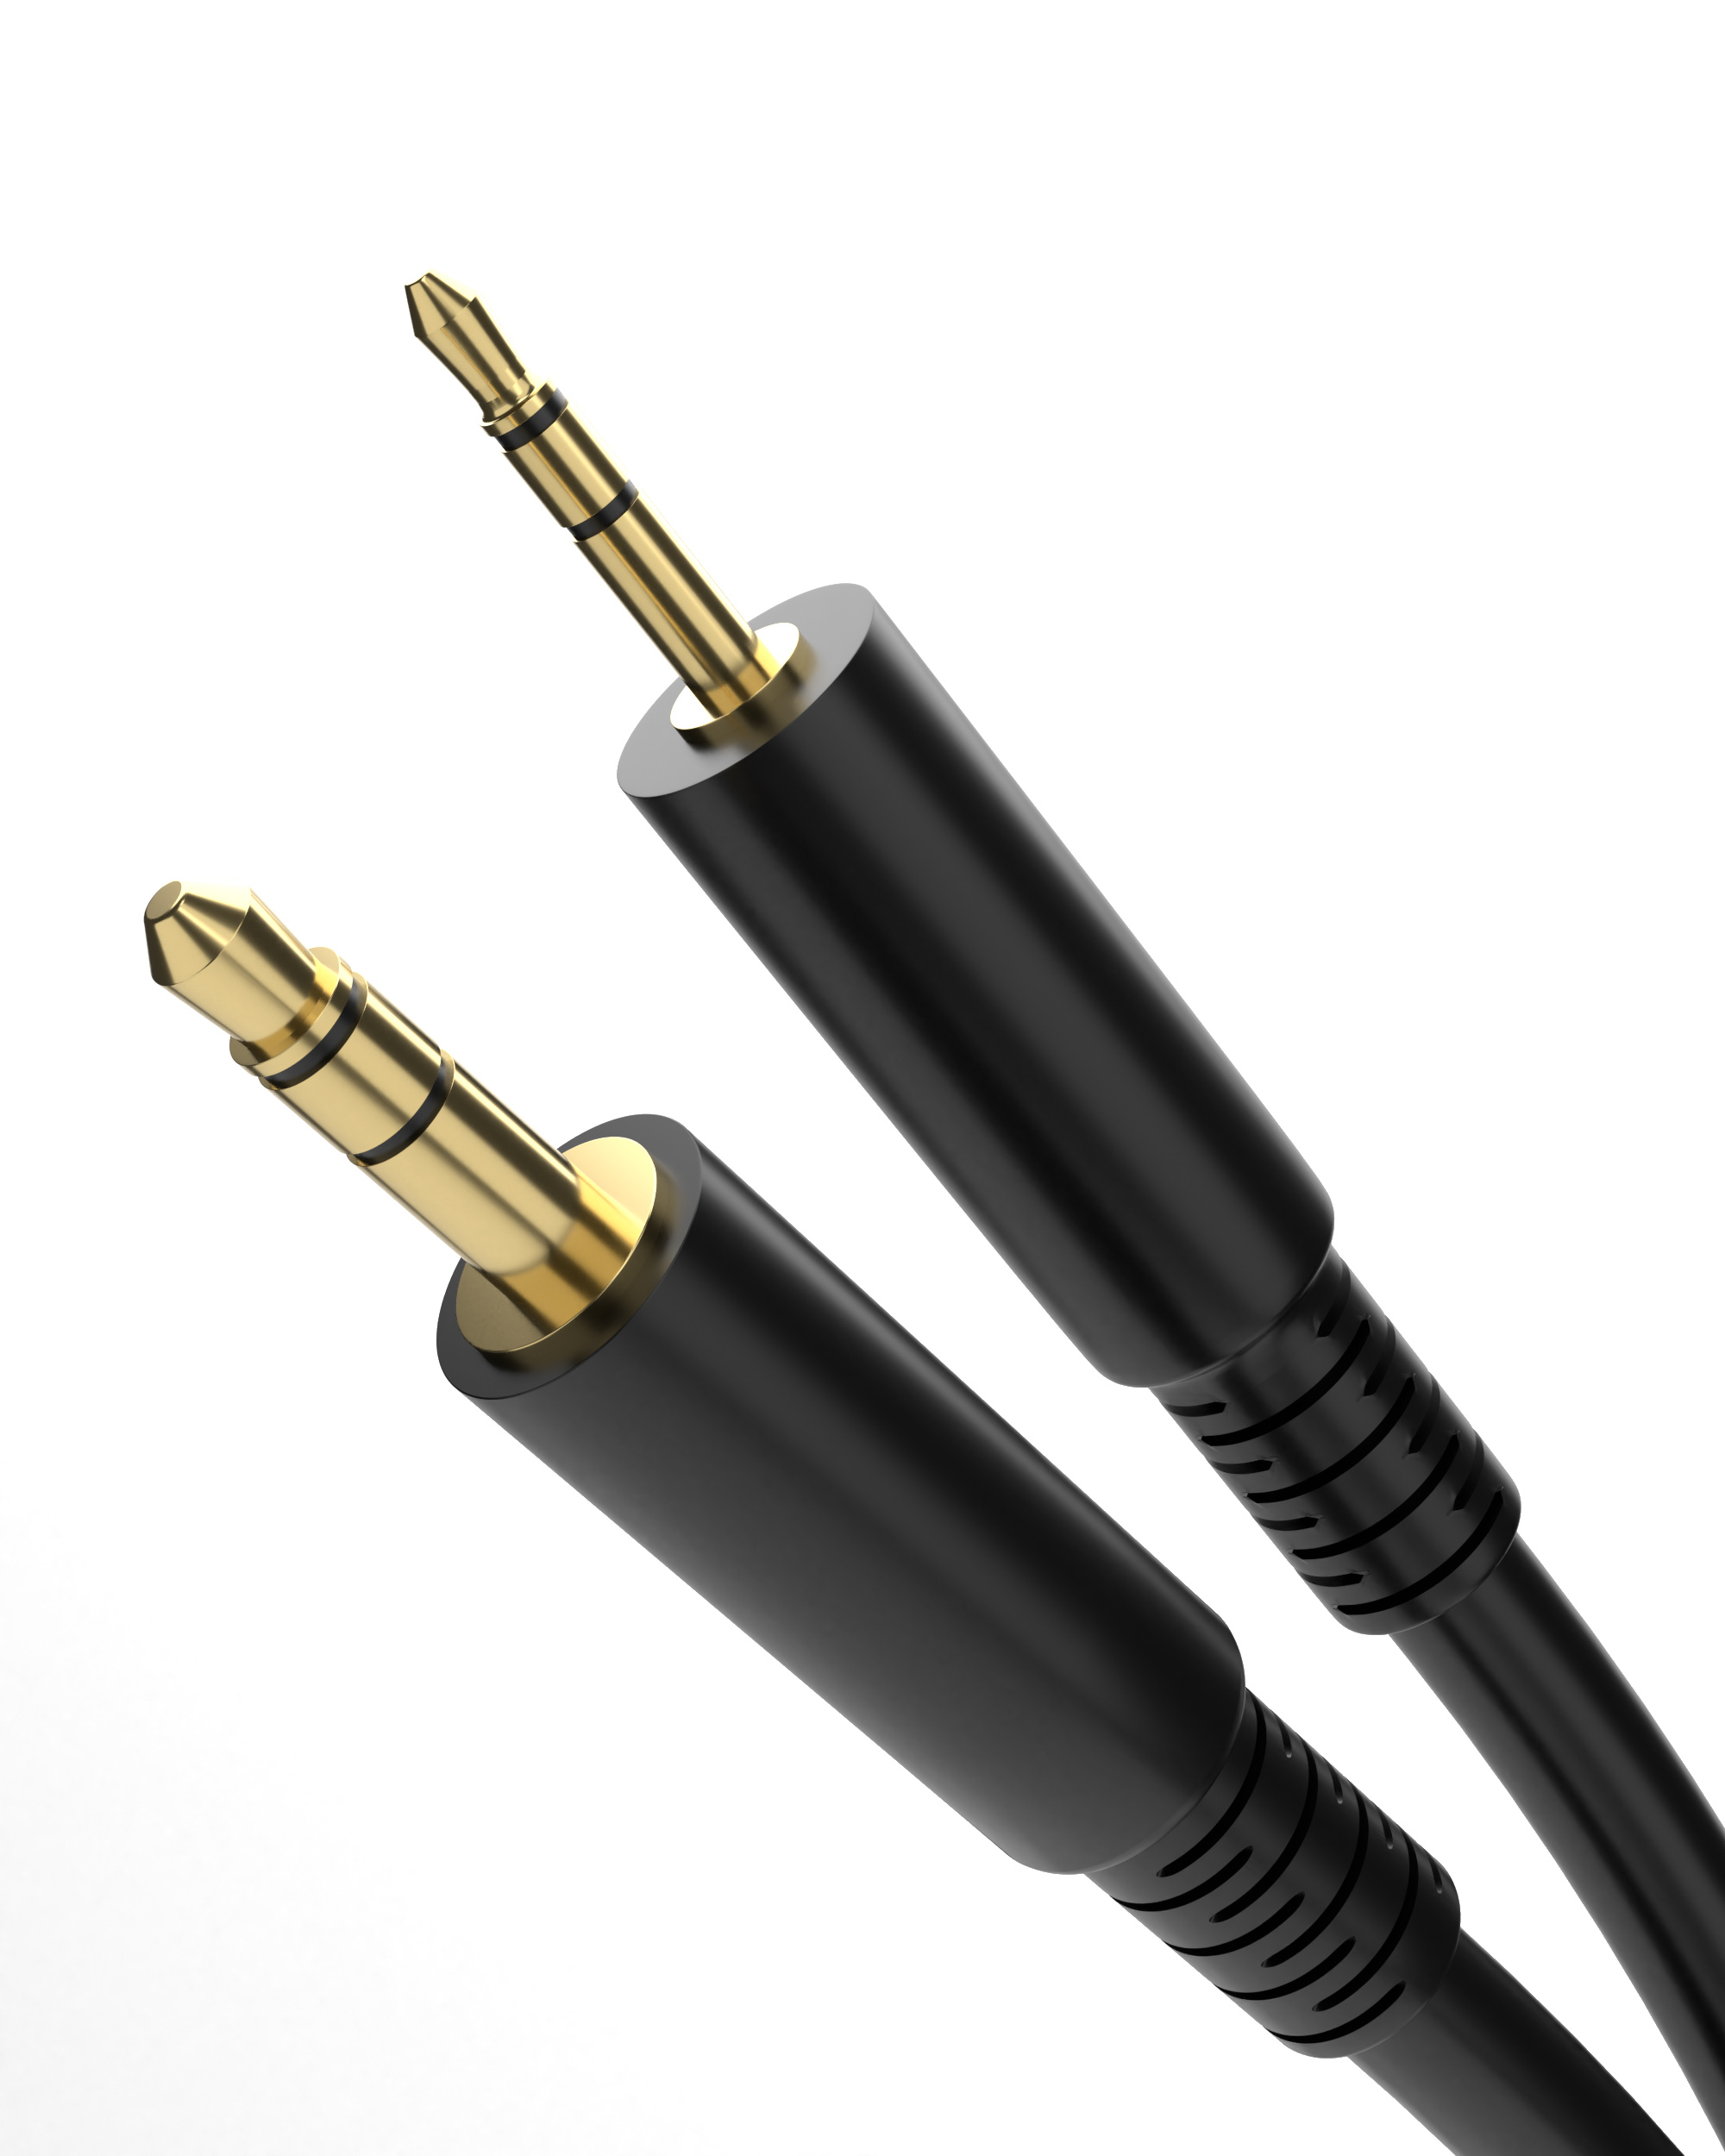 Indskrive Vugge Ung dame Headphone Cable Compatible with Bose QC35 / QC45 - Encased